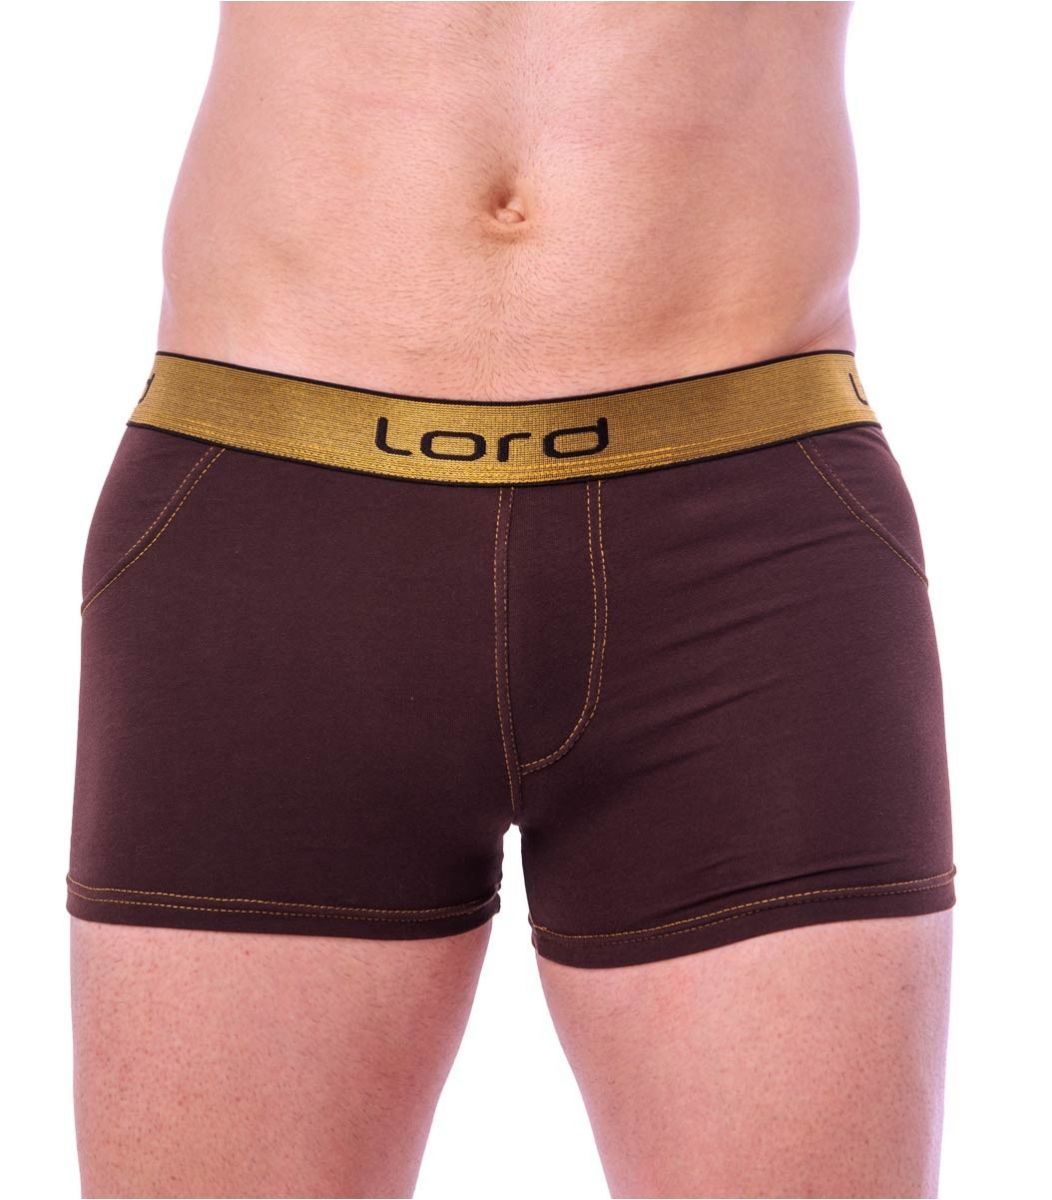  Lord Boxer, Golden Rubber, black- 2